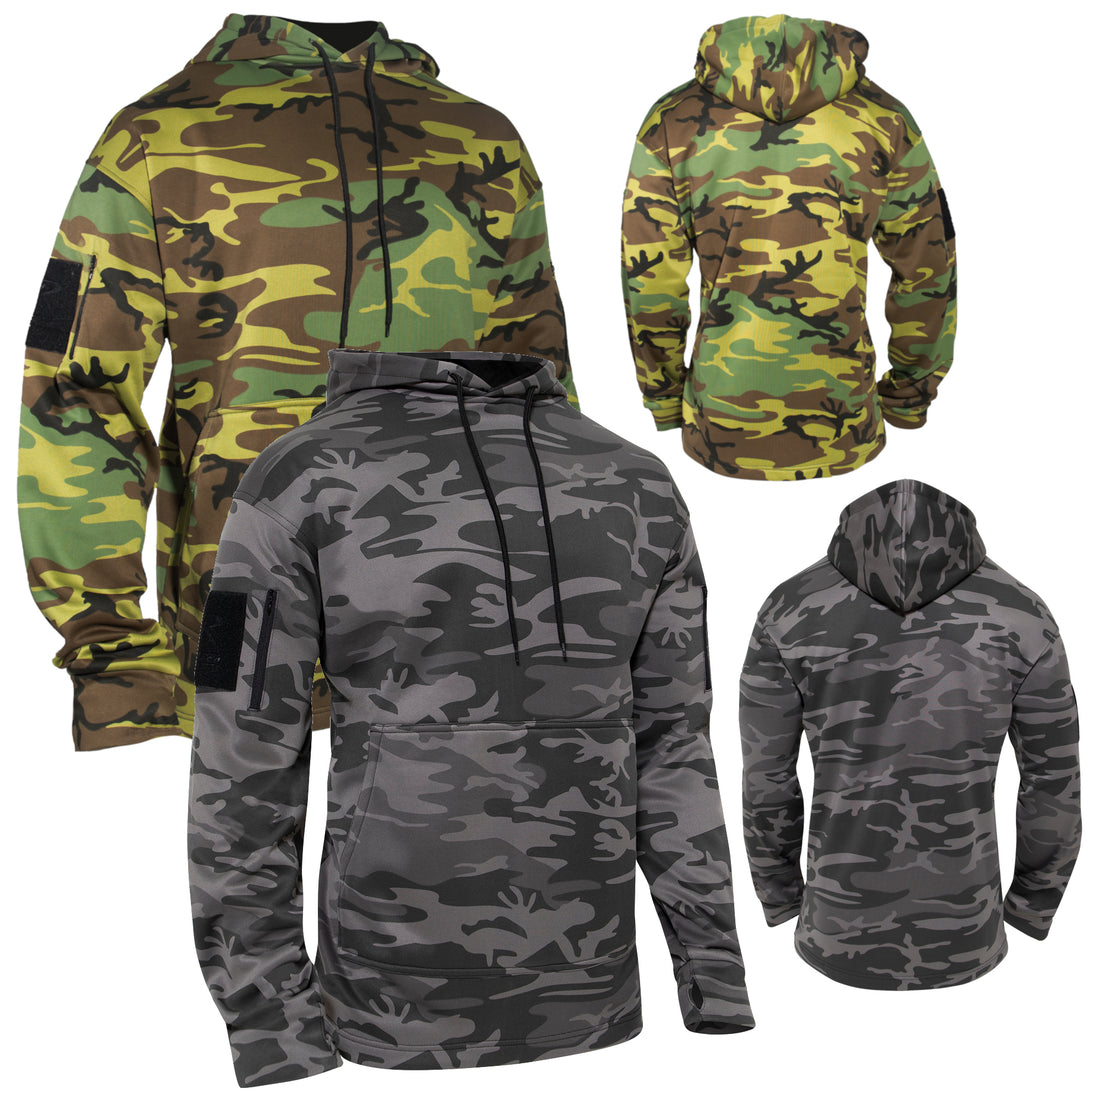 Rothco's Camo Concealed Carry Hoodie